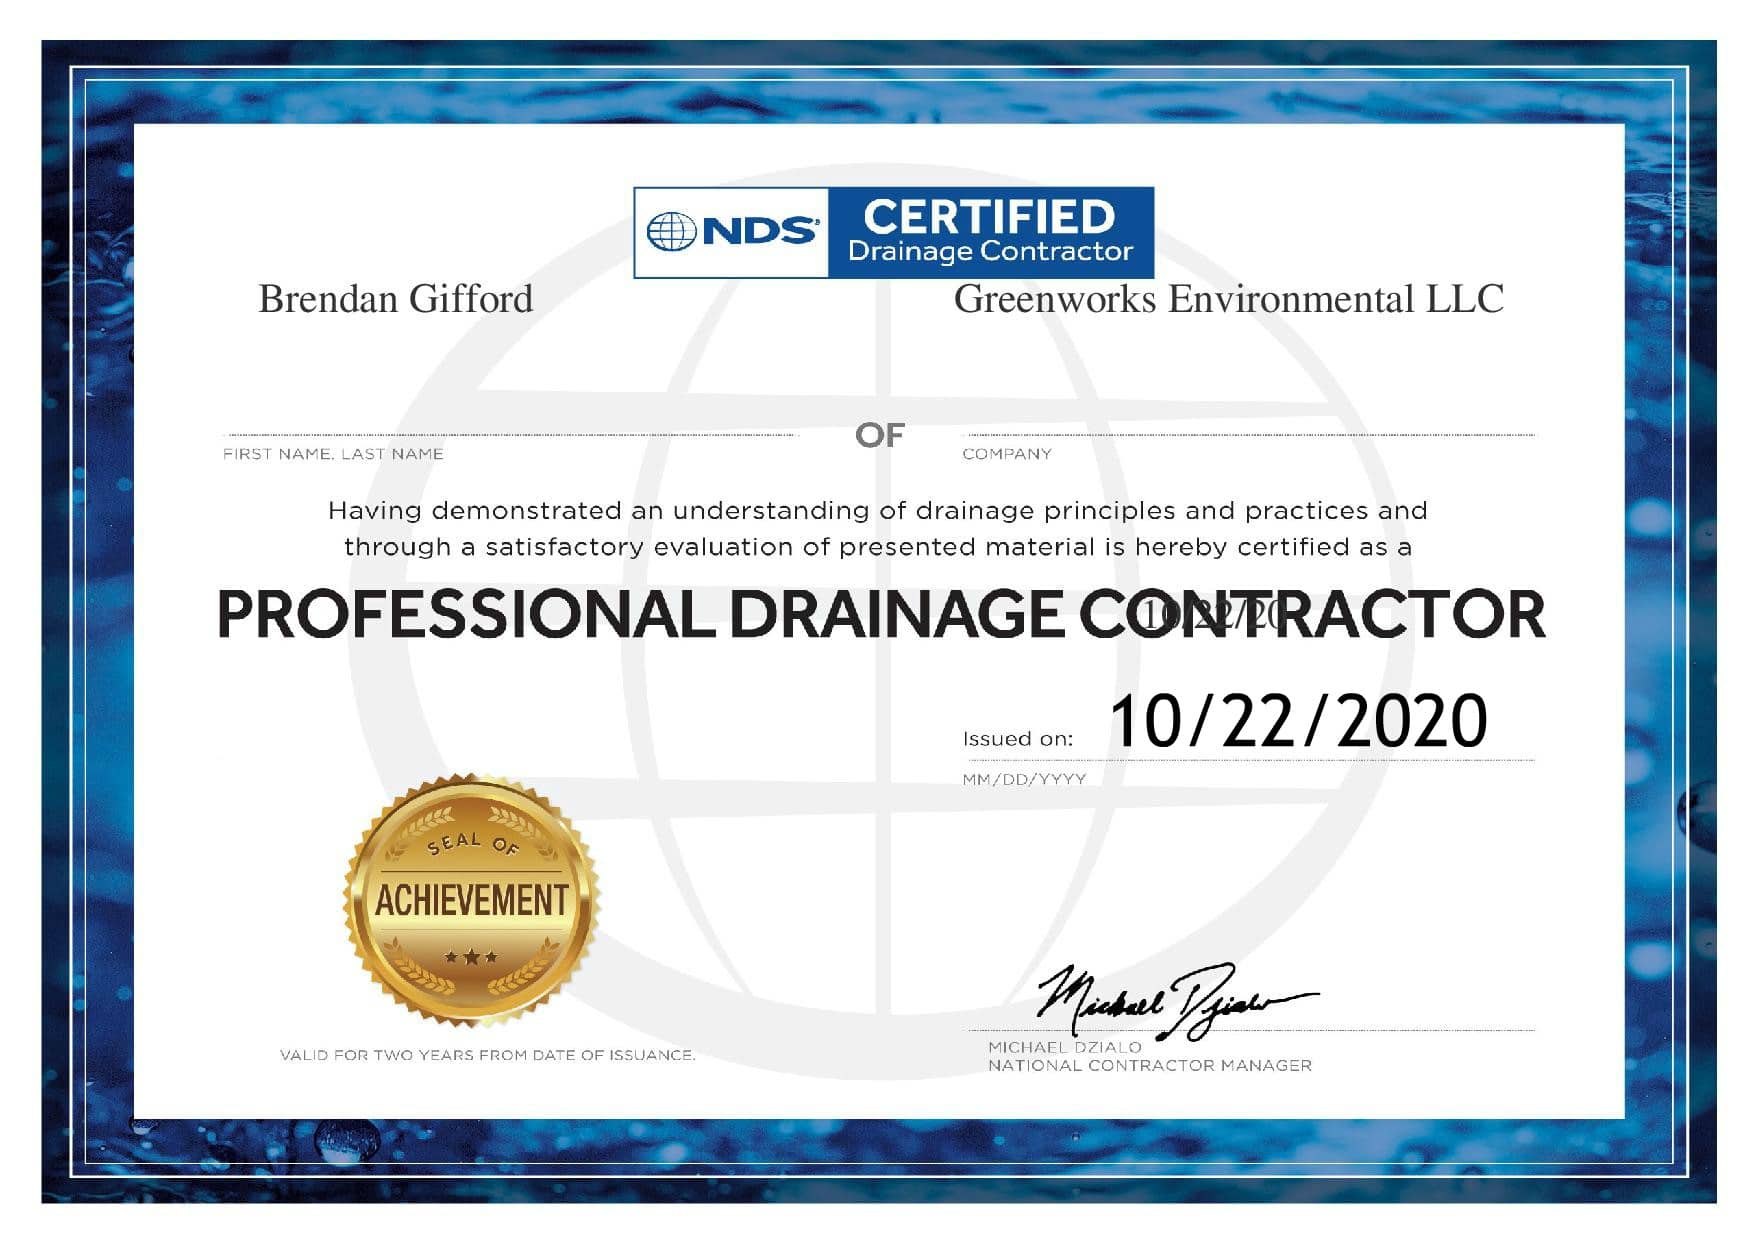 Gifford - cpdc - professional drainage contractor